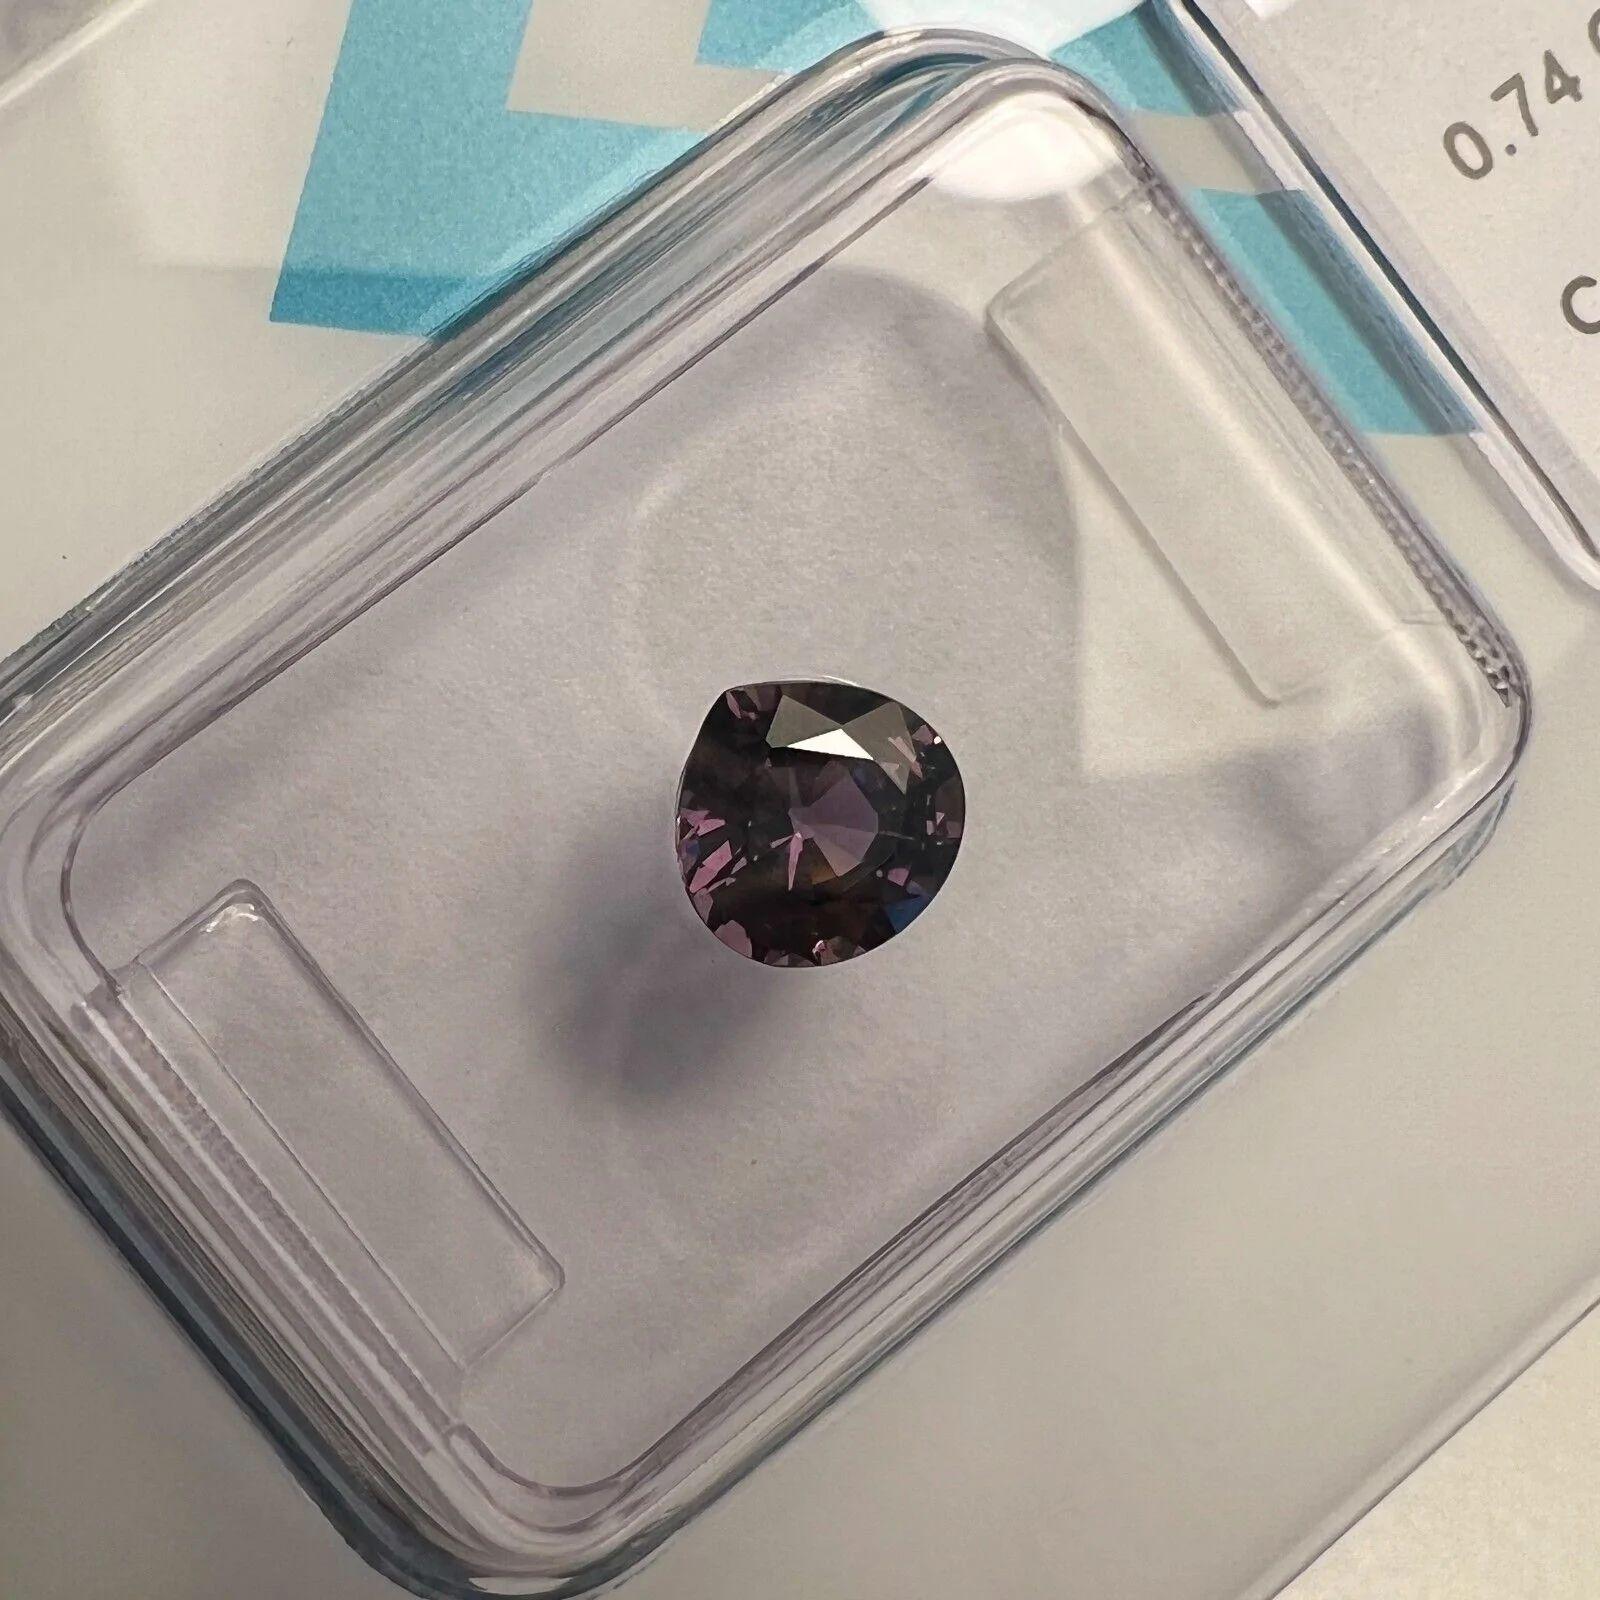 0.74ct Colour Change Sapphire Blue Purple Untreated IGI Certified Unheated Pear

Rare Untreated Colour Change Sapphire Gemstone.
0.74 Carat unheated sapphire with a rare colour change effect. Changing colour depending on the light its viewed in.